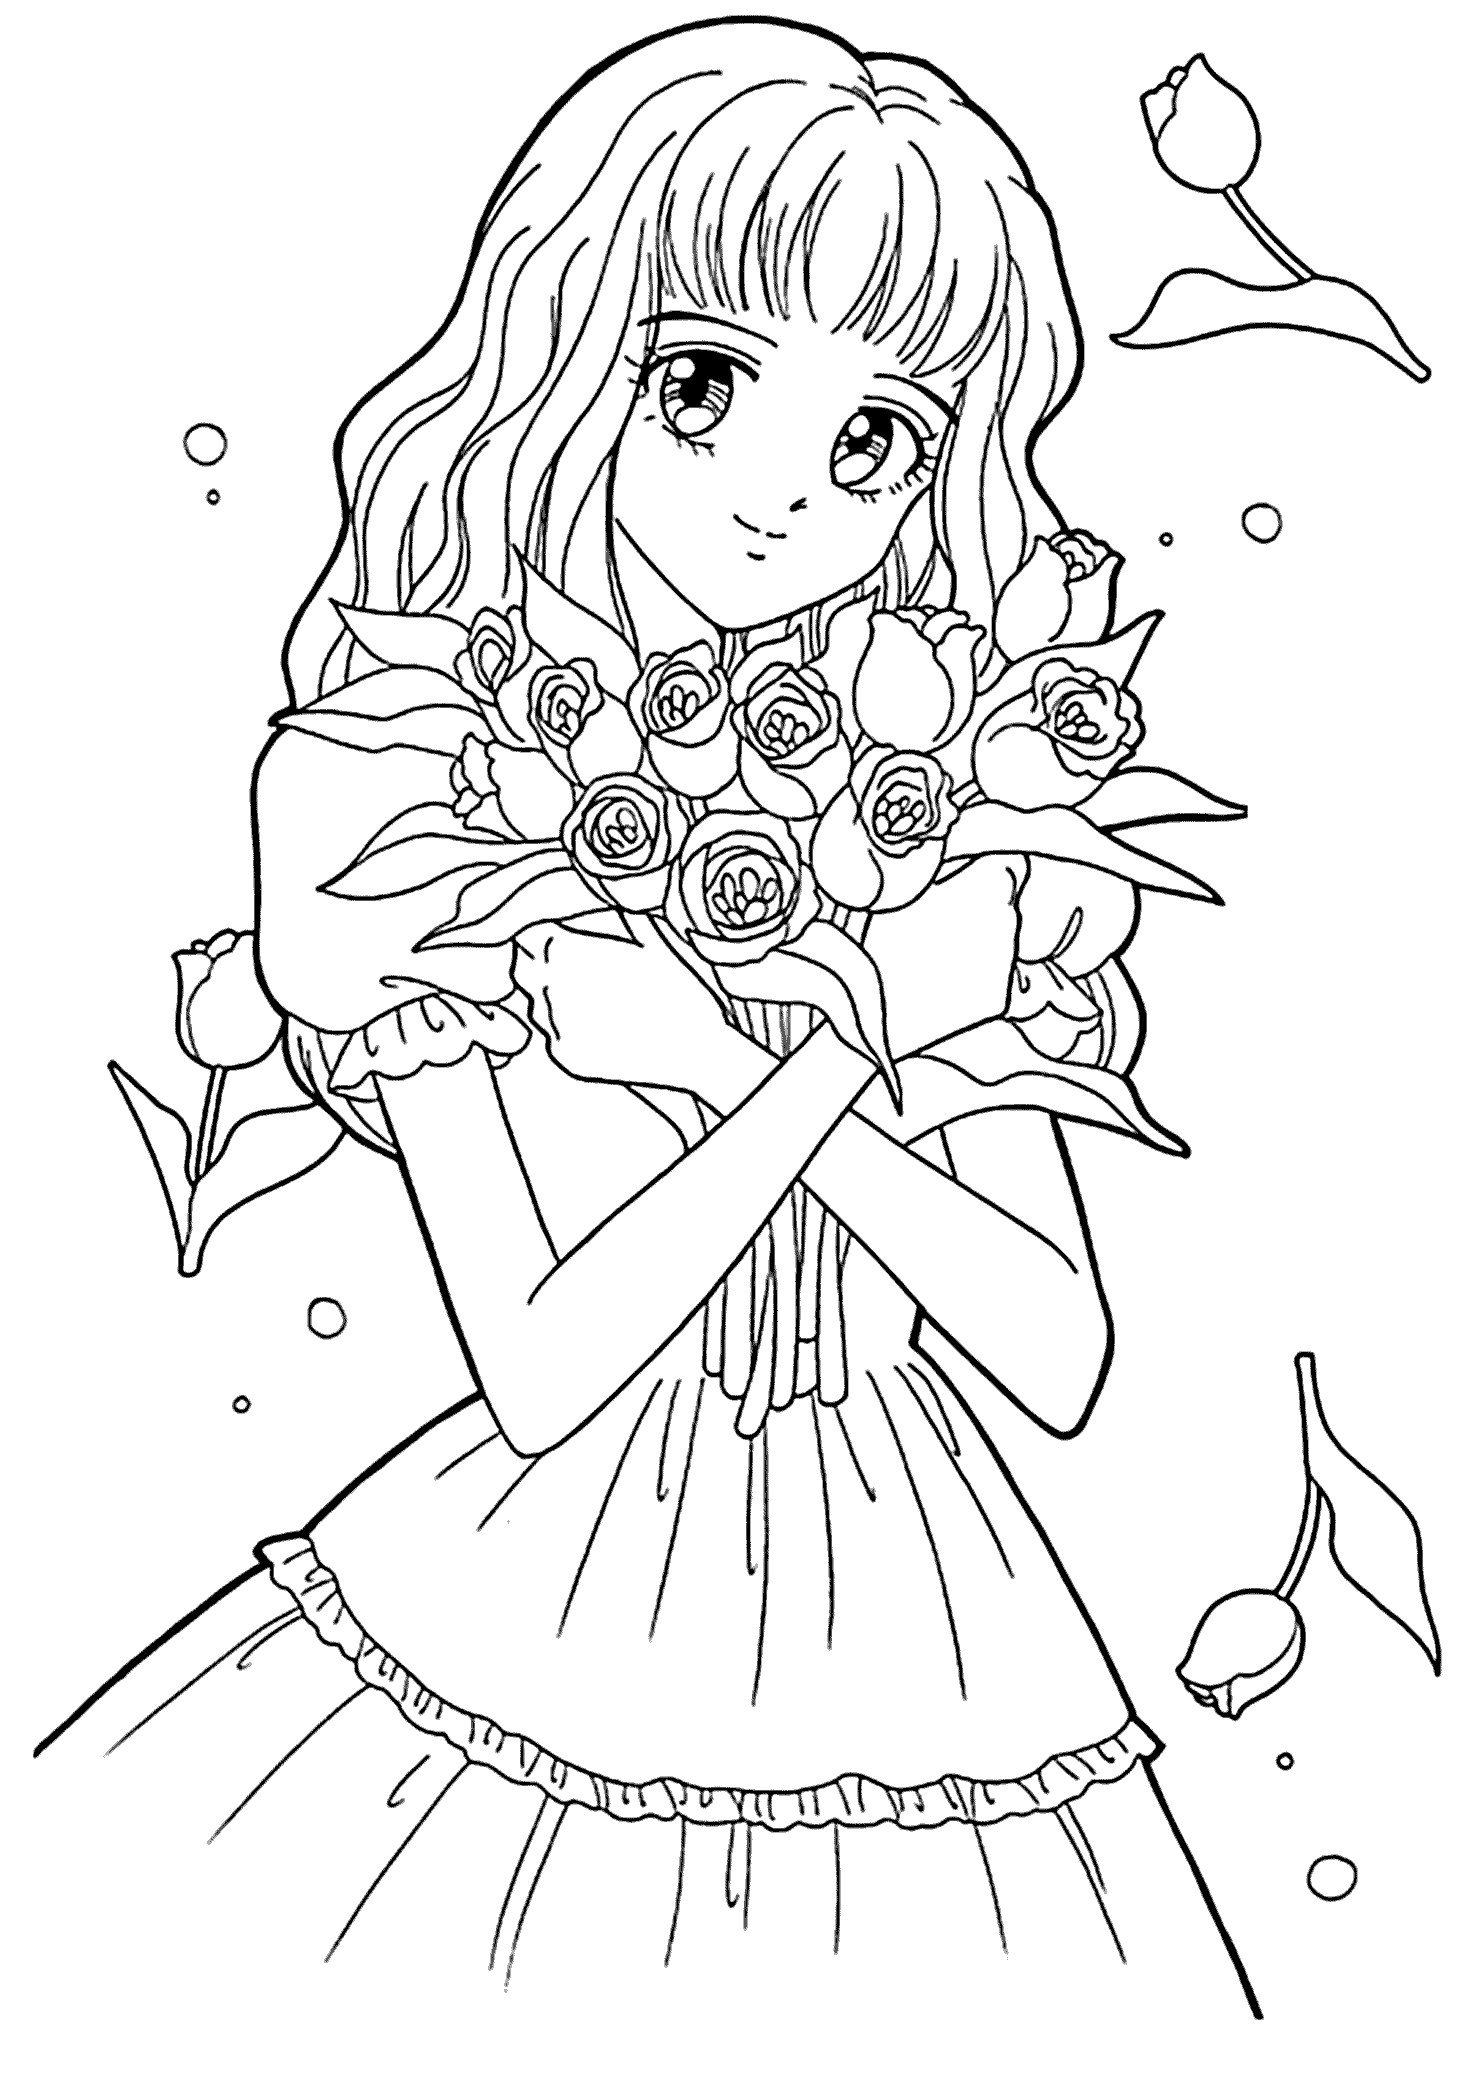 Coloring Pages For Girls To Print
 Best Free Printable Coloring Pages for Kids and Teens